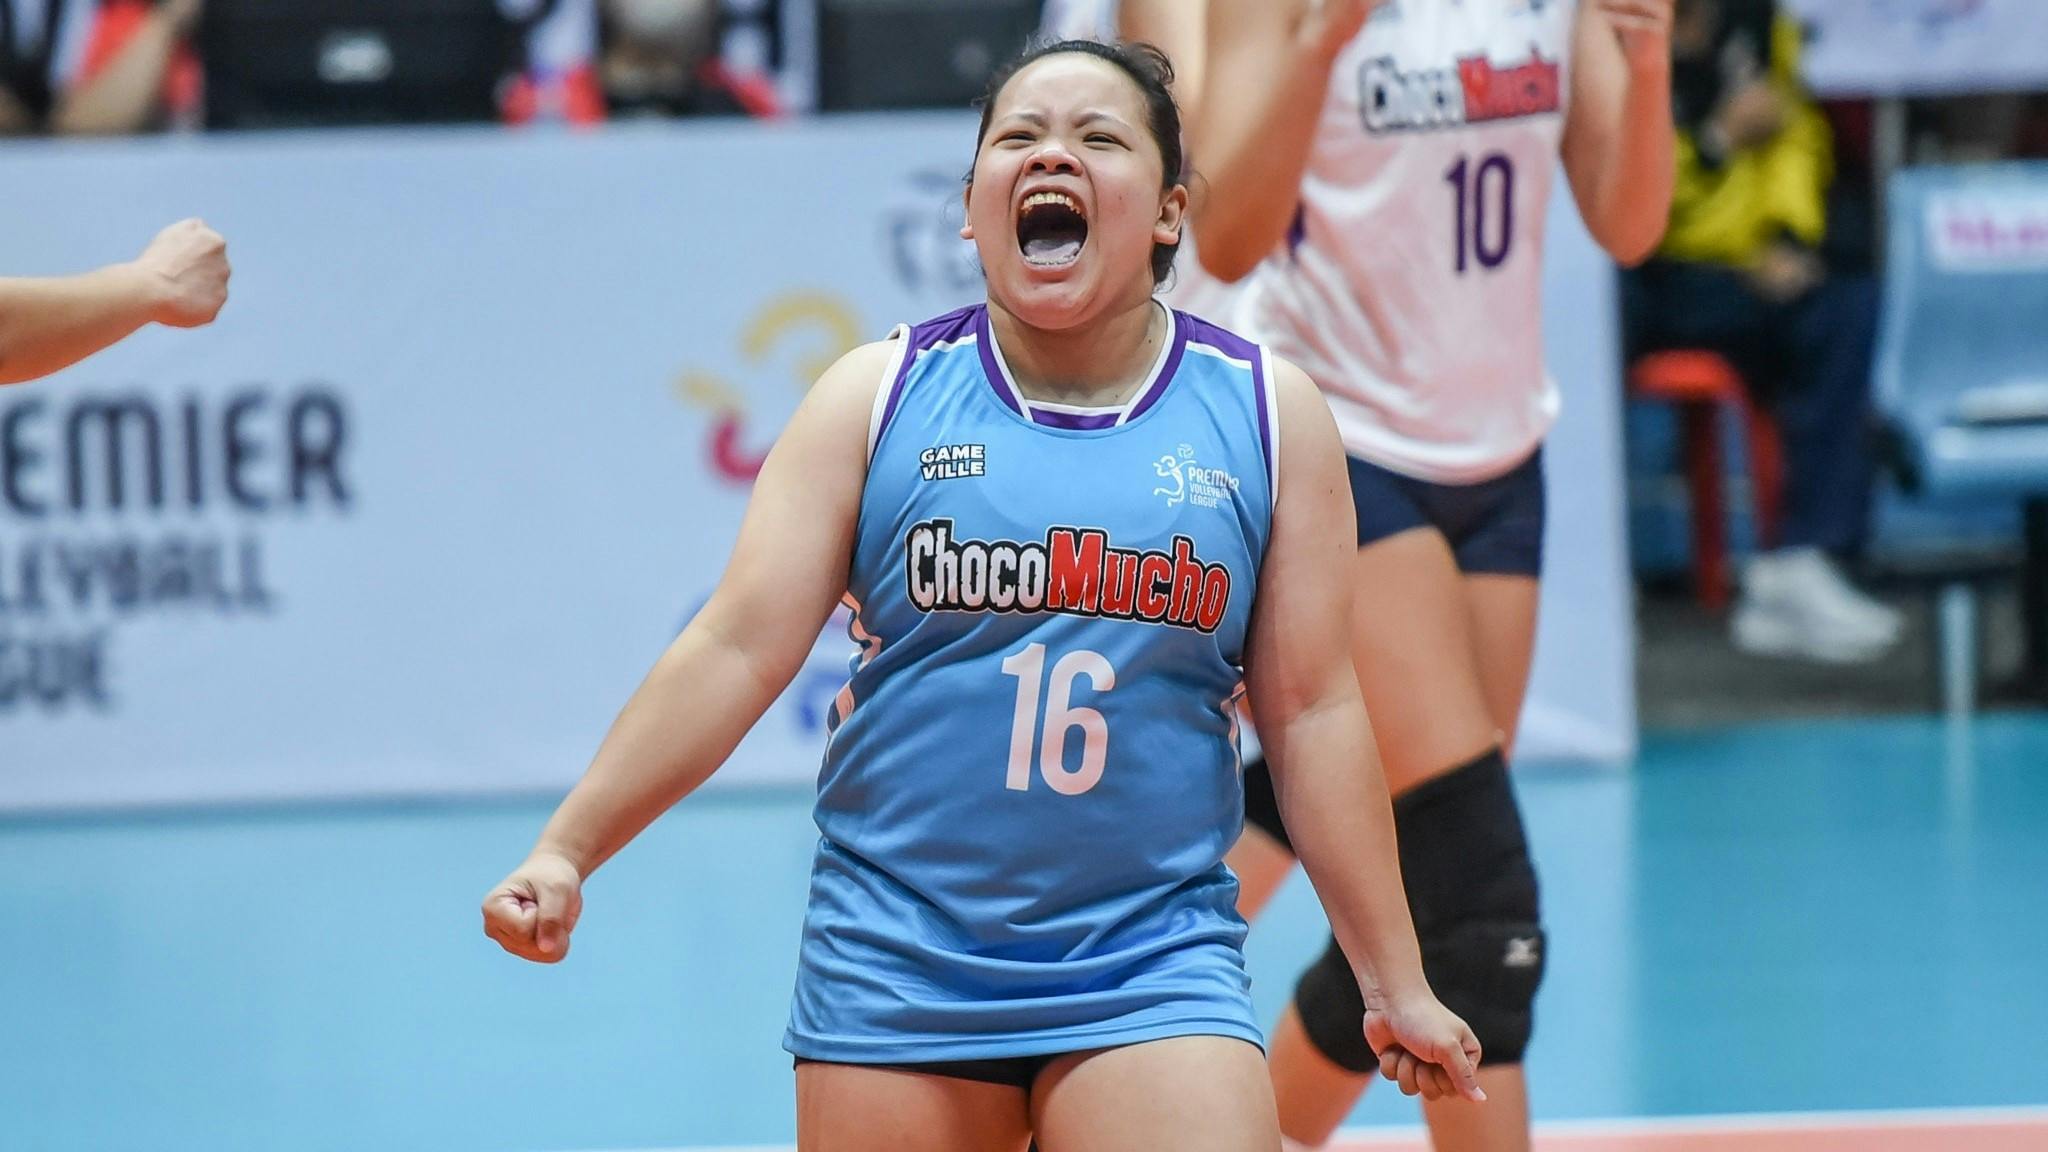 Choco Mucho libero Thang Ponce starts forever with partner, volleyball friends celebrate